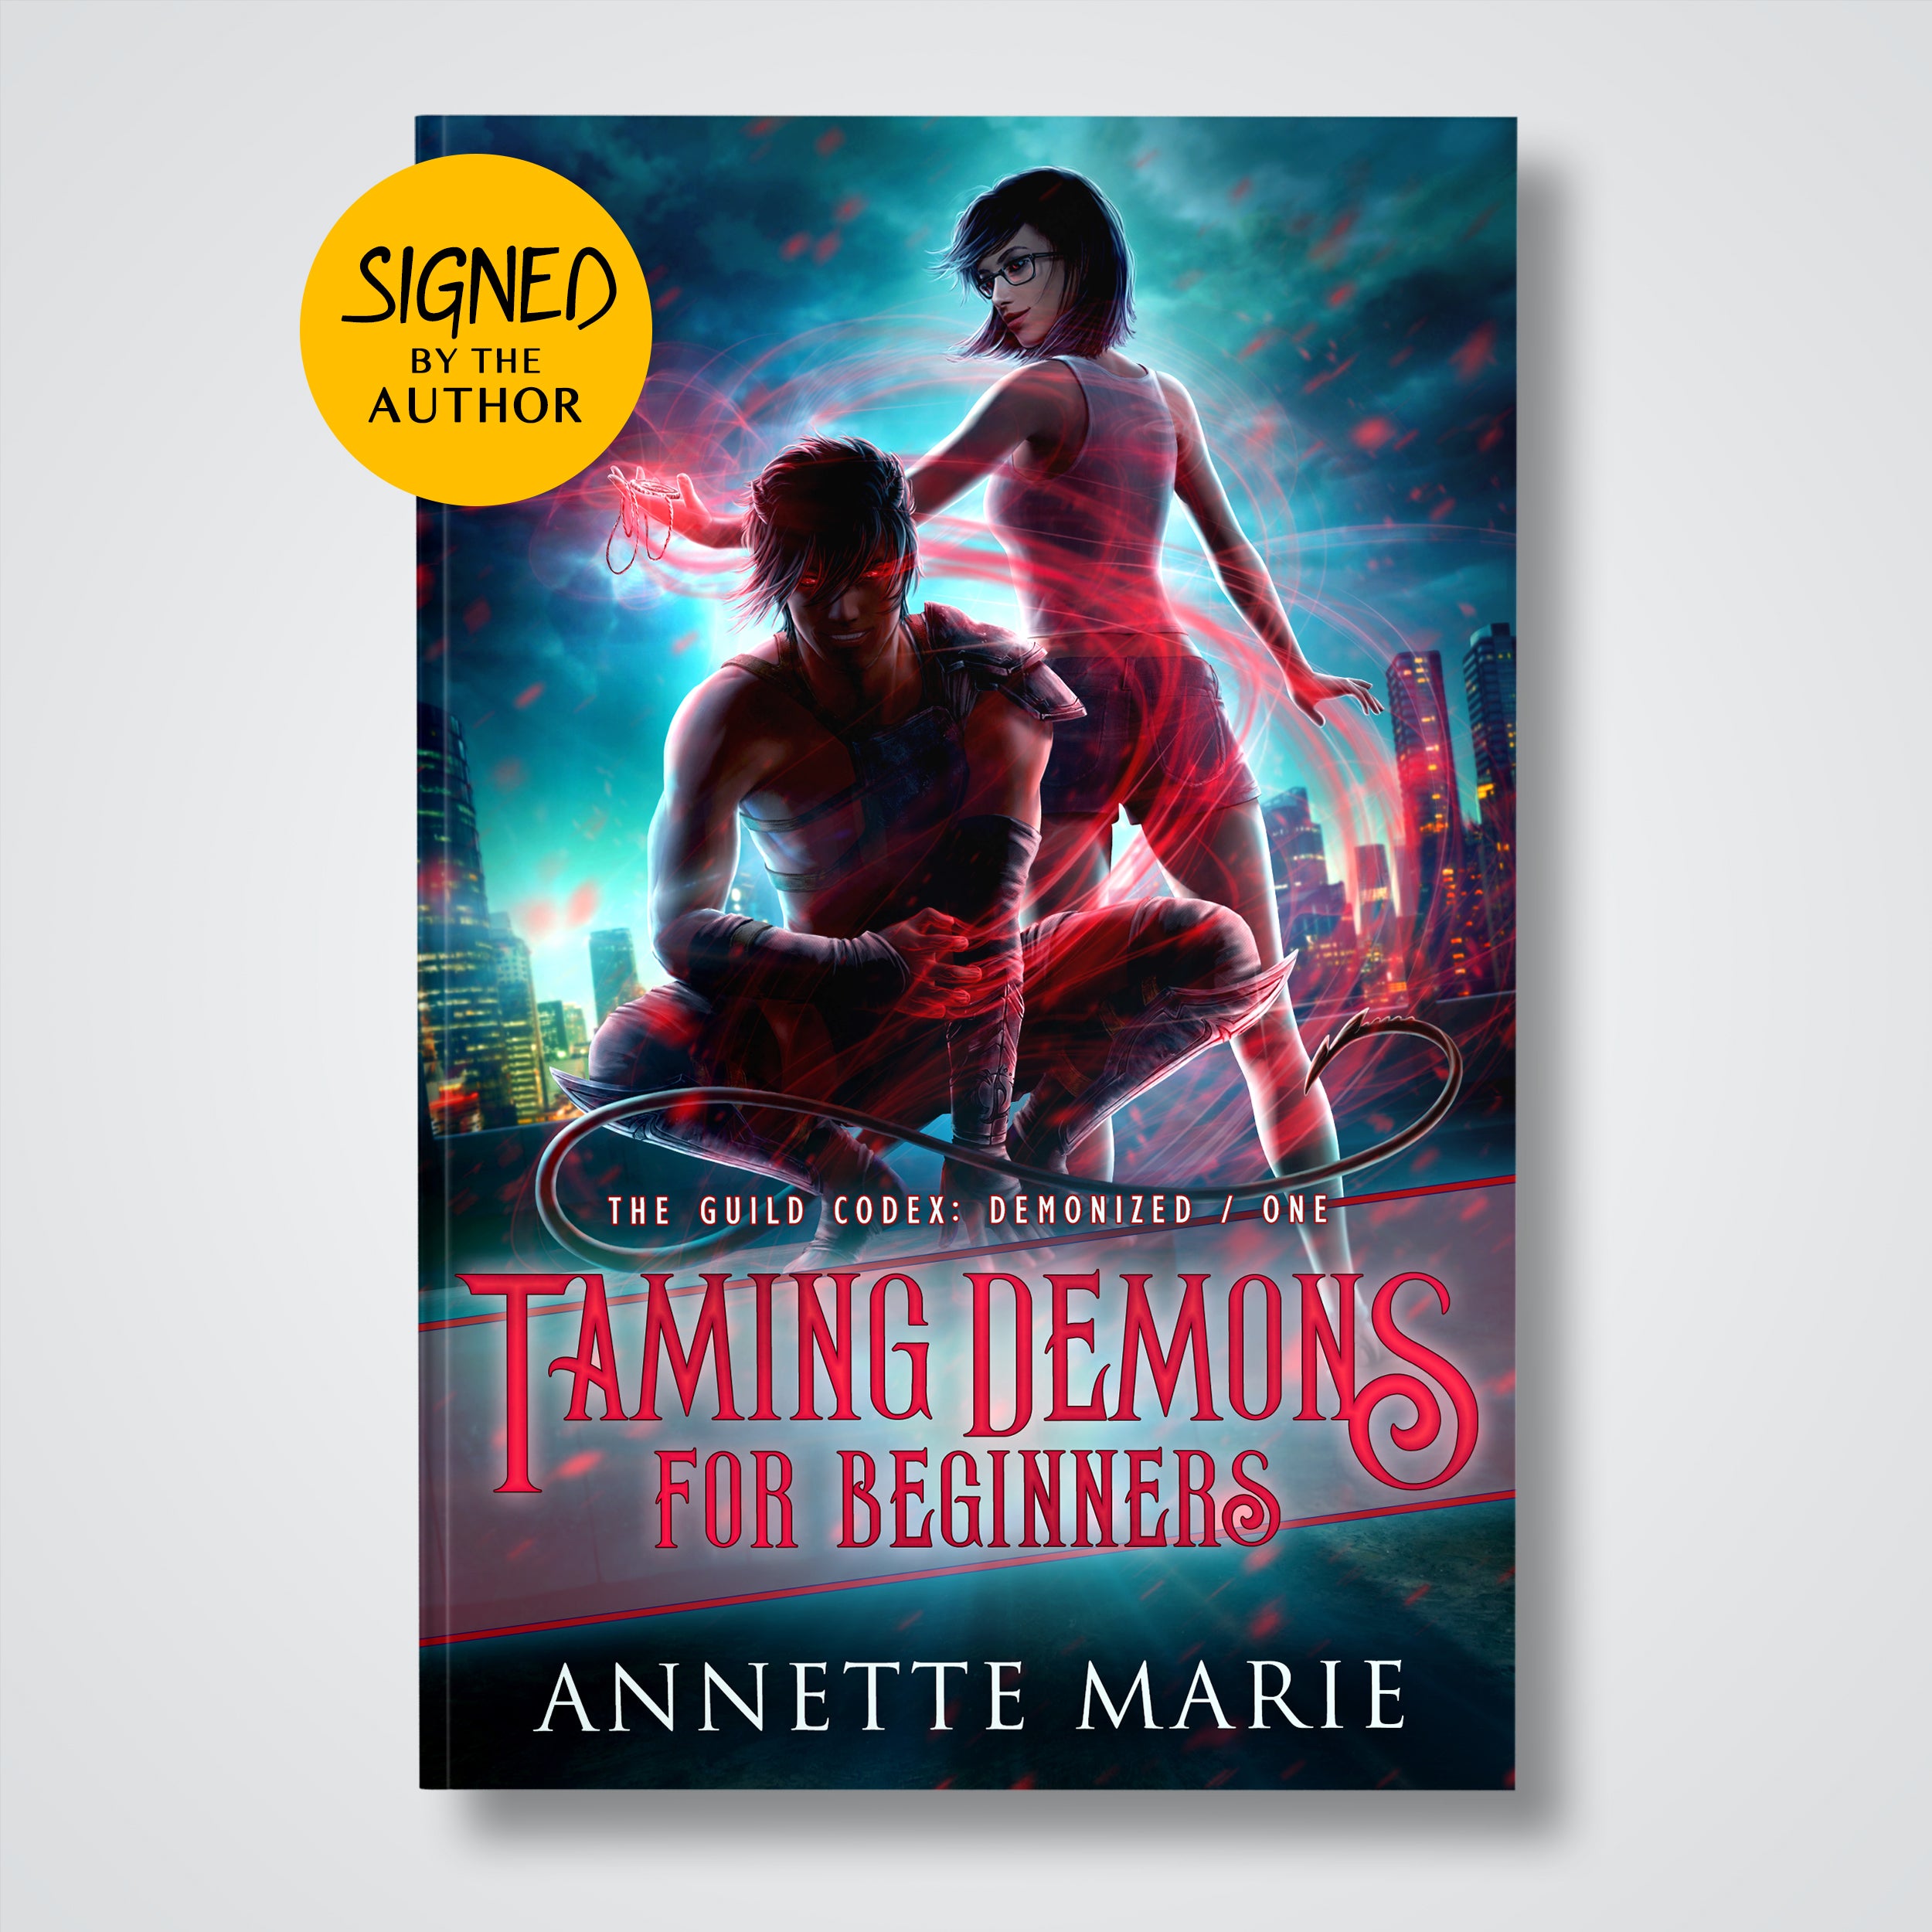 Demons　Paperback　–　Beginners　for　Book　Shop　Annette　Signed　Taming　Marie